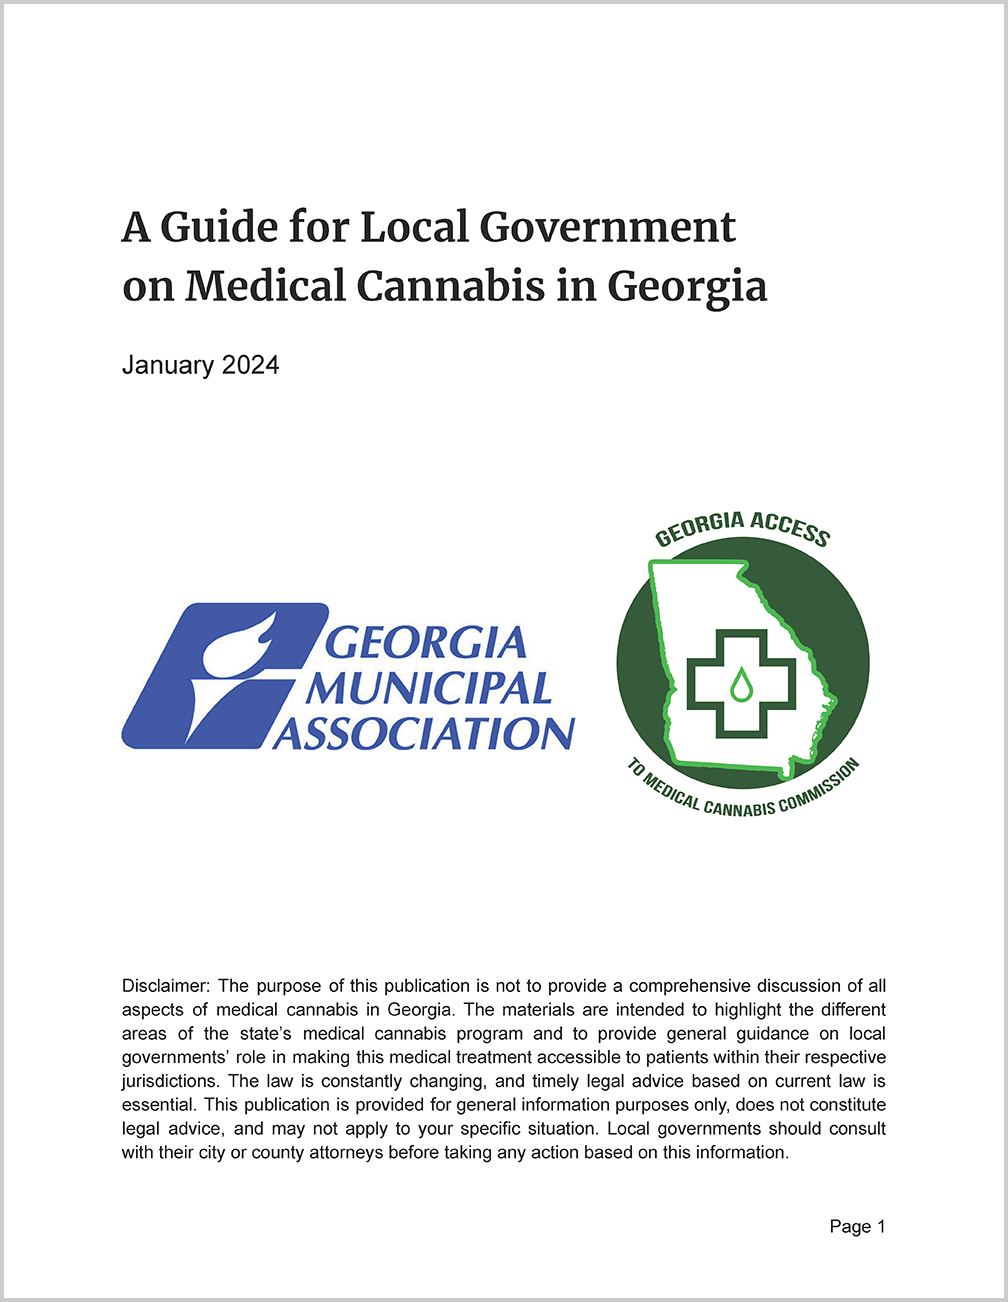 A Guide for Local Government on Medical Cannabis in Georgia